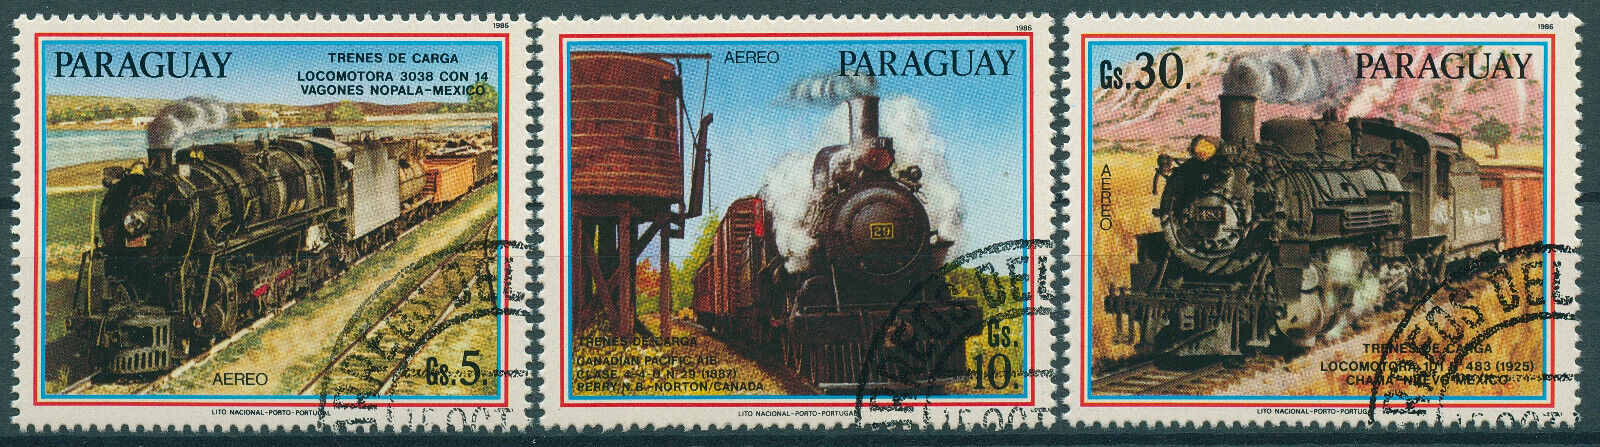 Paraguay 1986 CTO Freight Trains Stamps Steam Engines Locomotives Rail 3v Set